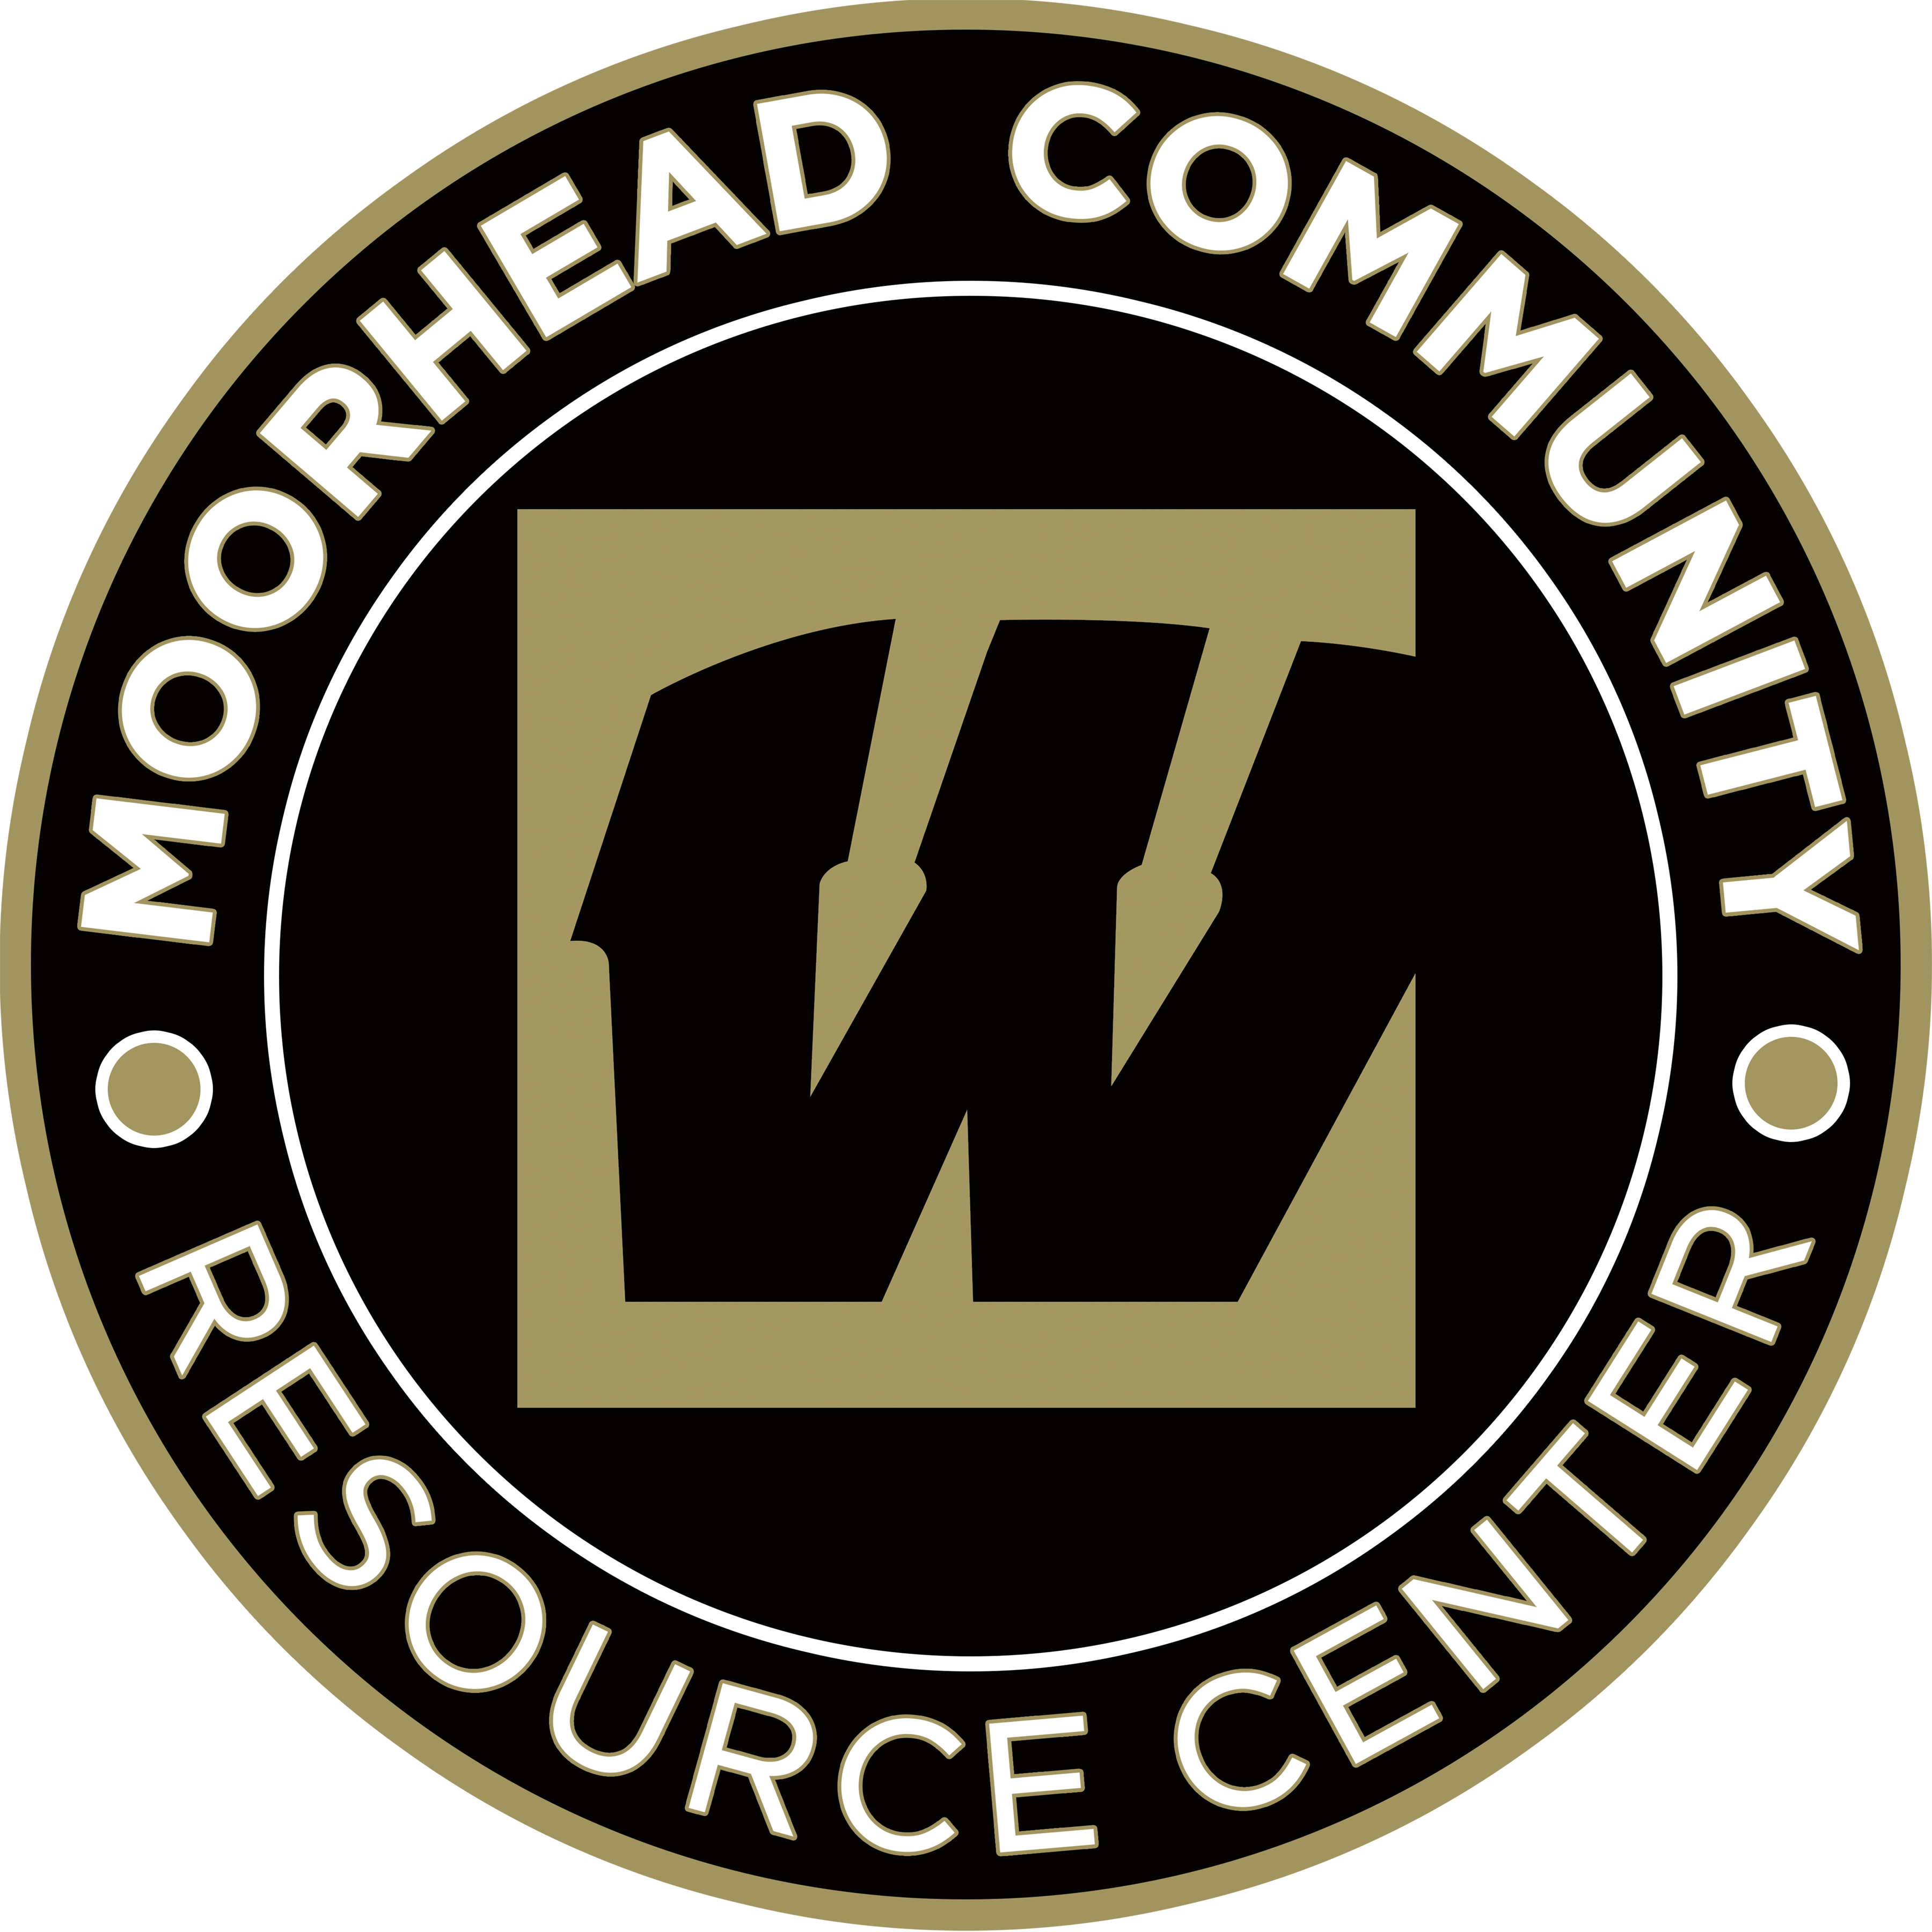 Moorhead Community Resource Center of MSD Warren Township In Indianapolis, Indiana Logo